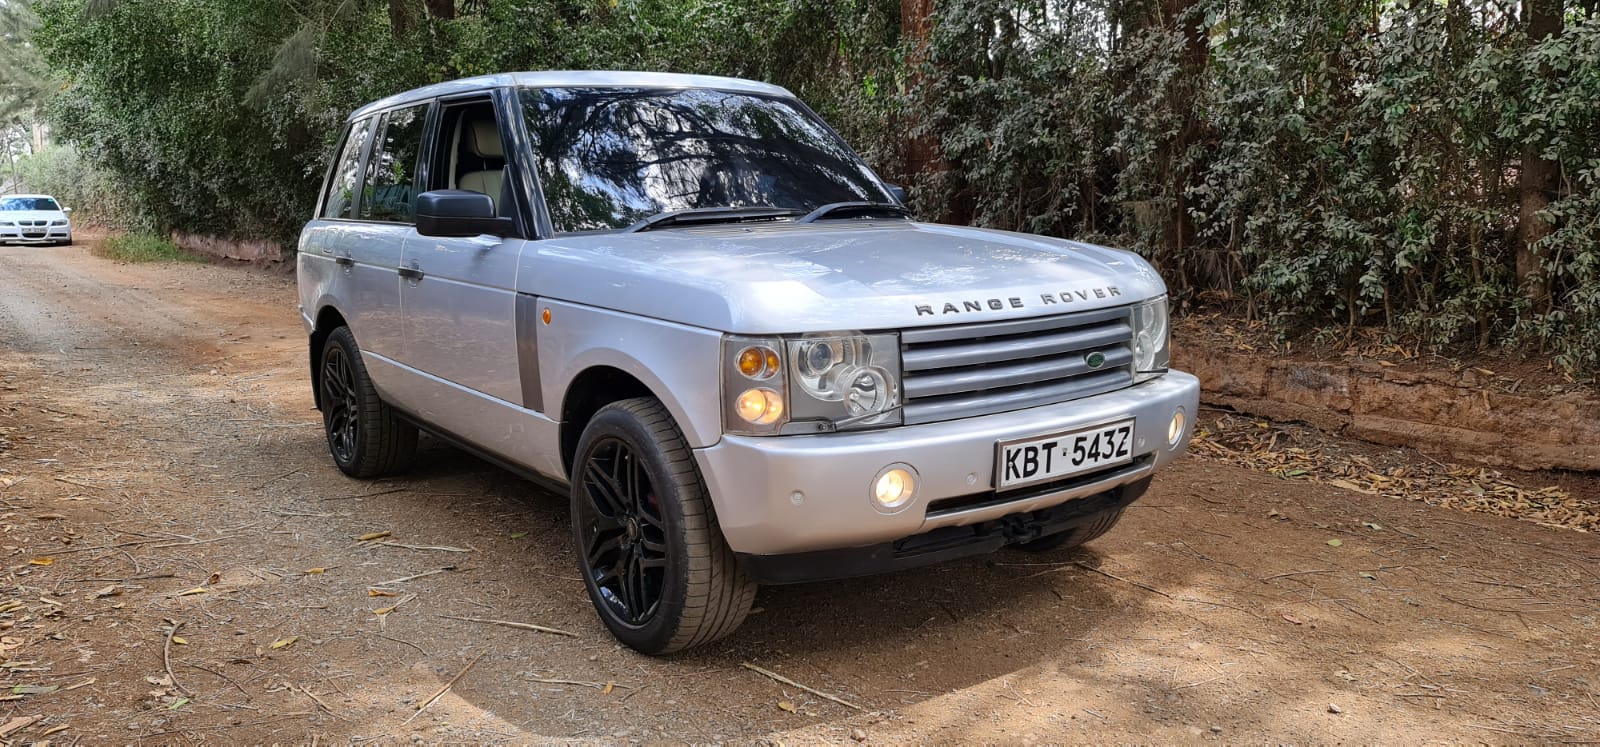 Range Rover Vogue Super Charge 1.6M You Pay 30% Deposit Trade in OK